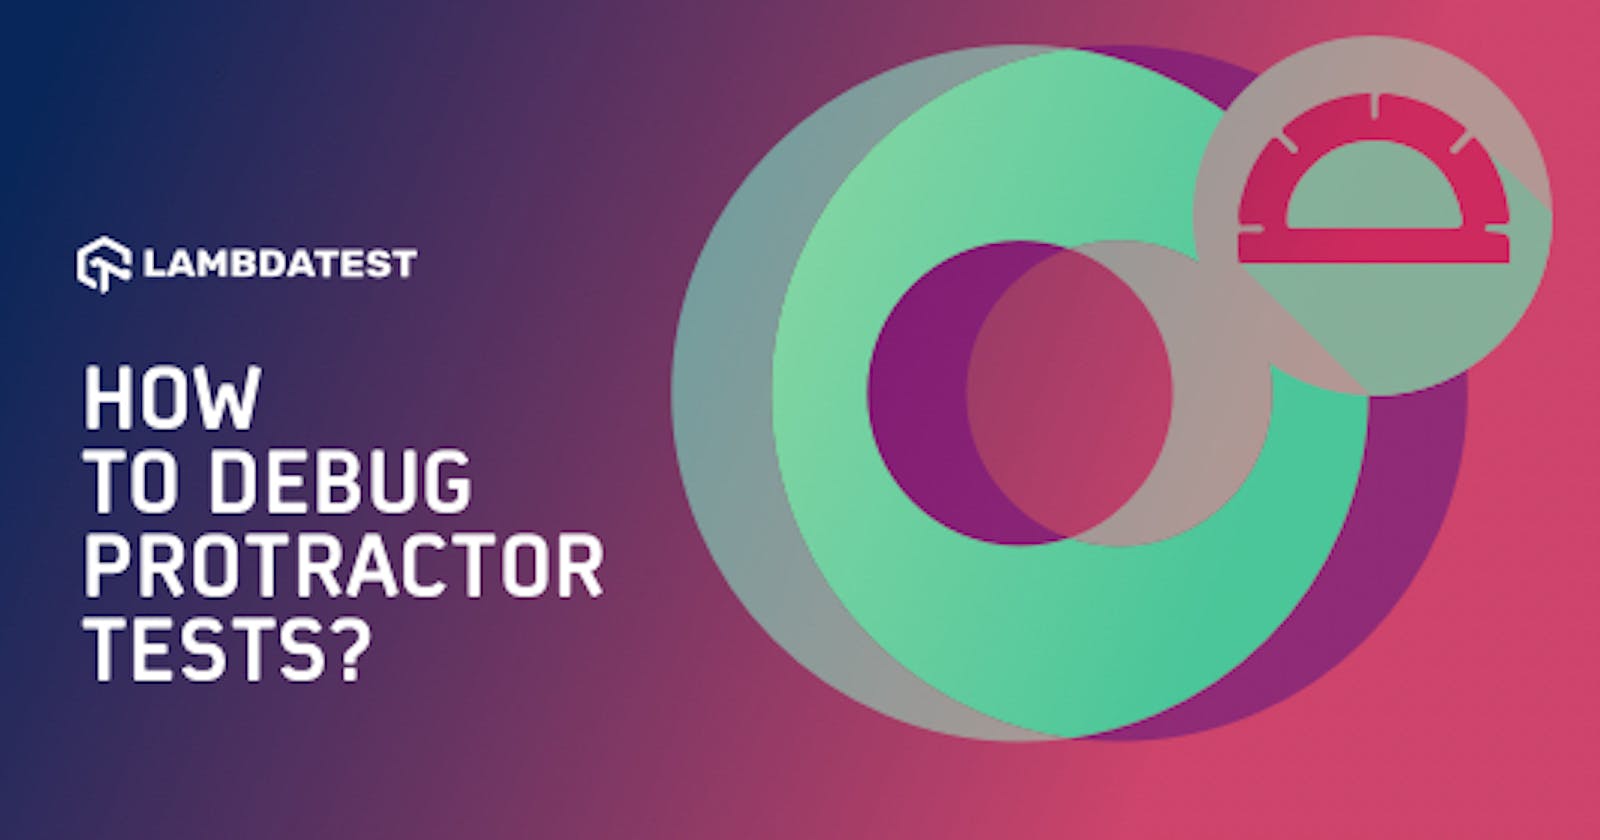 How To Debug Protractor Tests for Selenium Test Automation